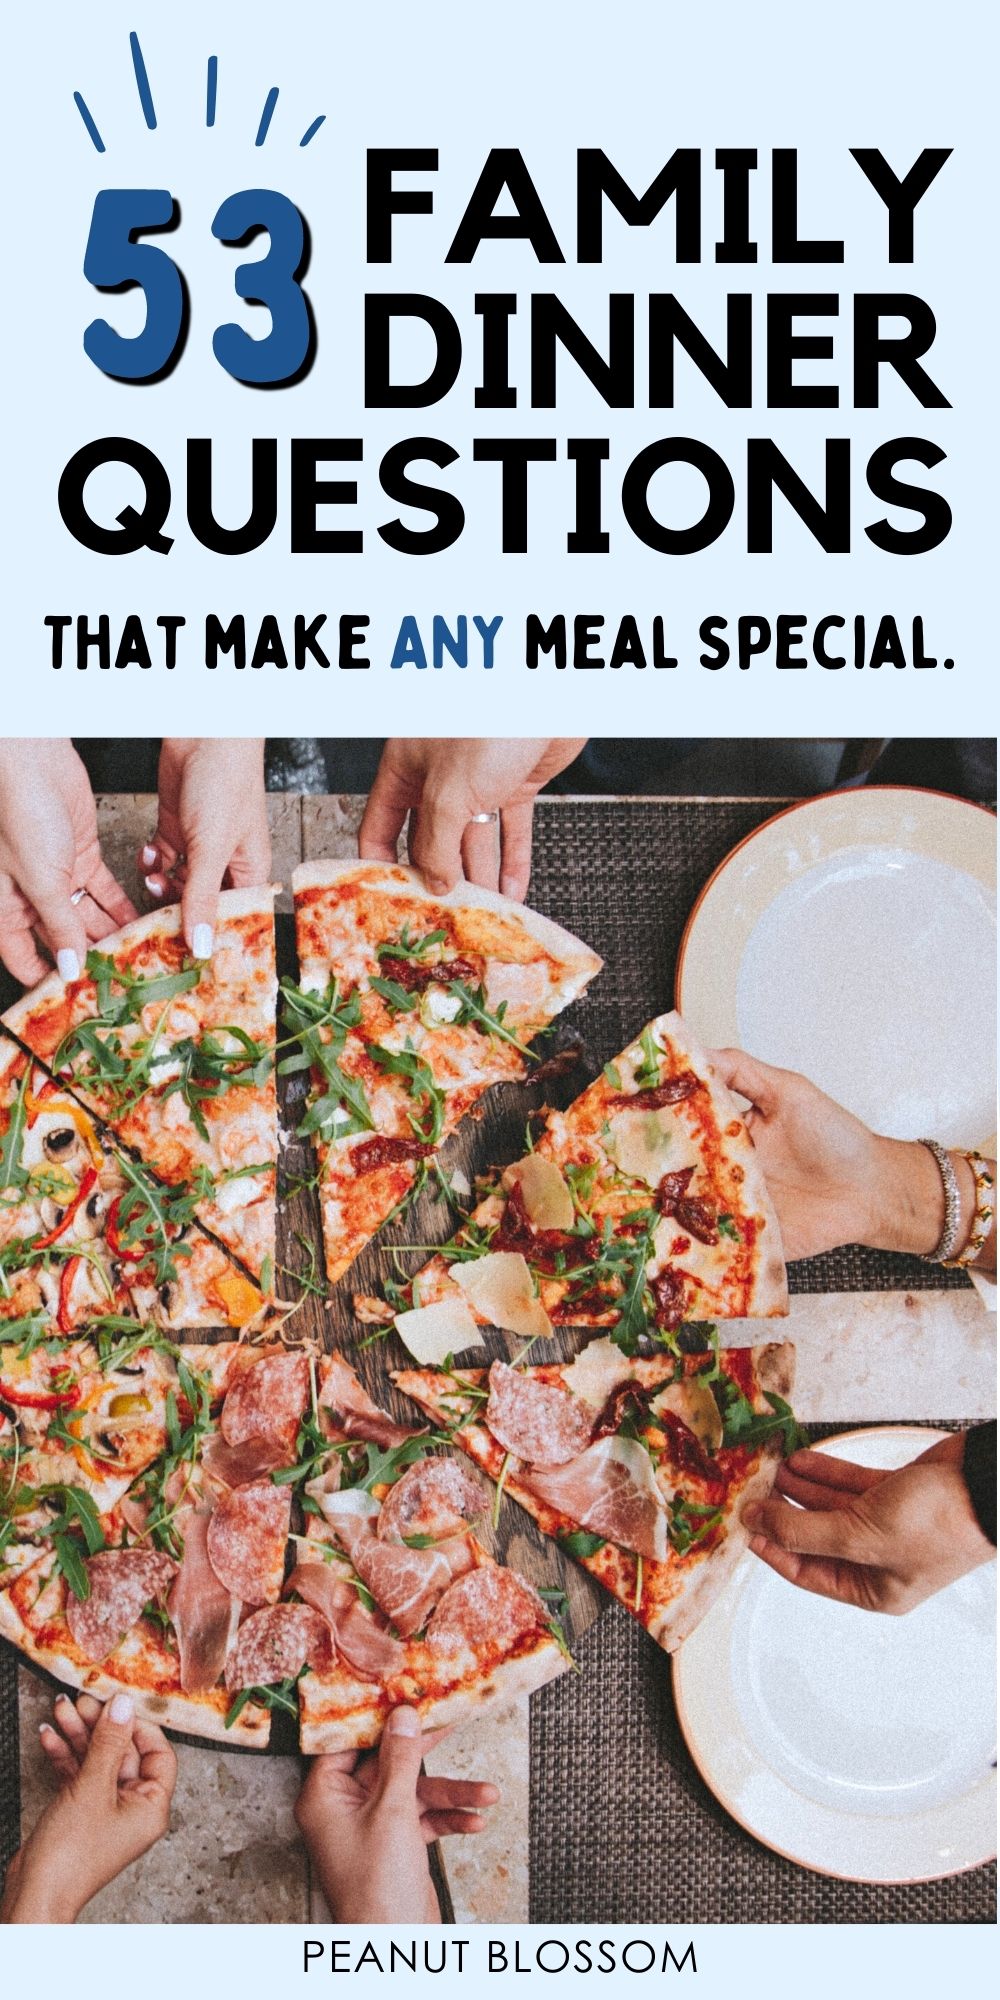 Text reads: "53 Family Dinner Questions: that make ANY meal special"  Collage includes a photo of hands grabbing pizza slices at the family dinner table.